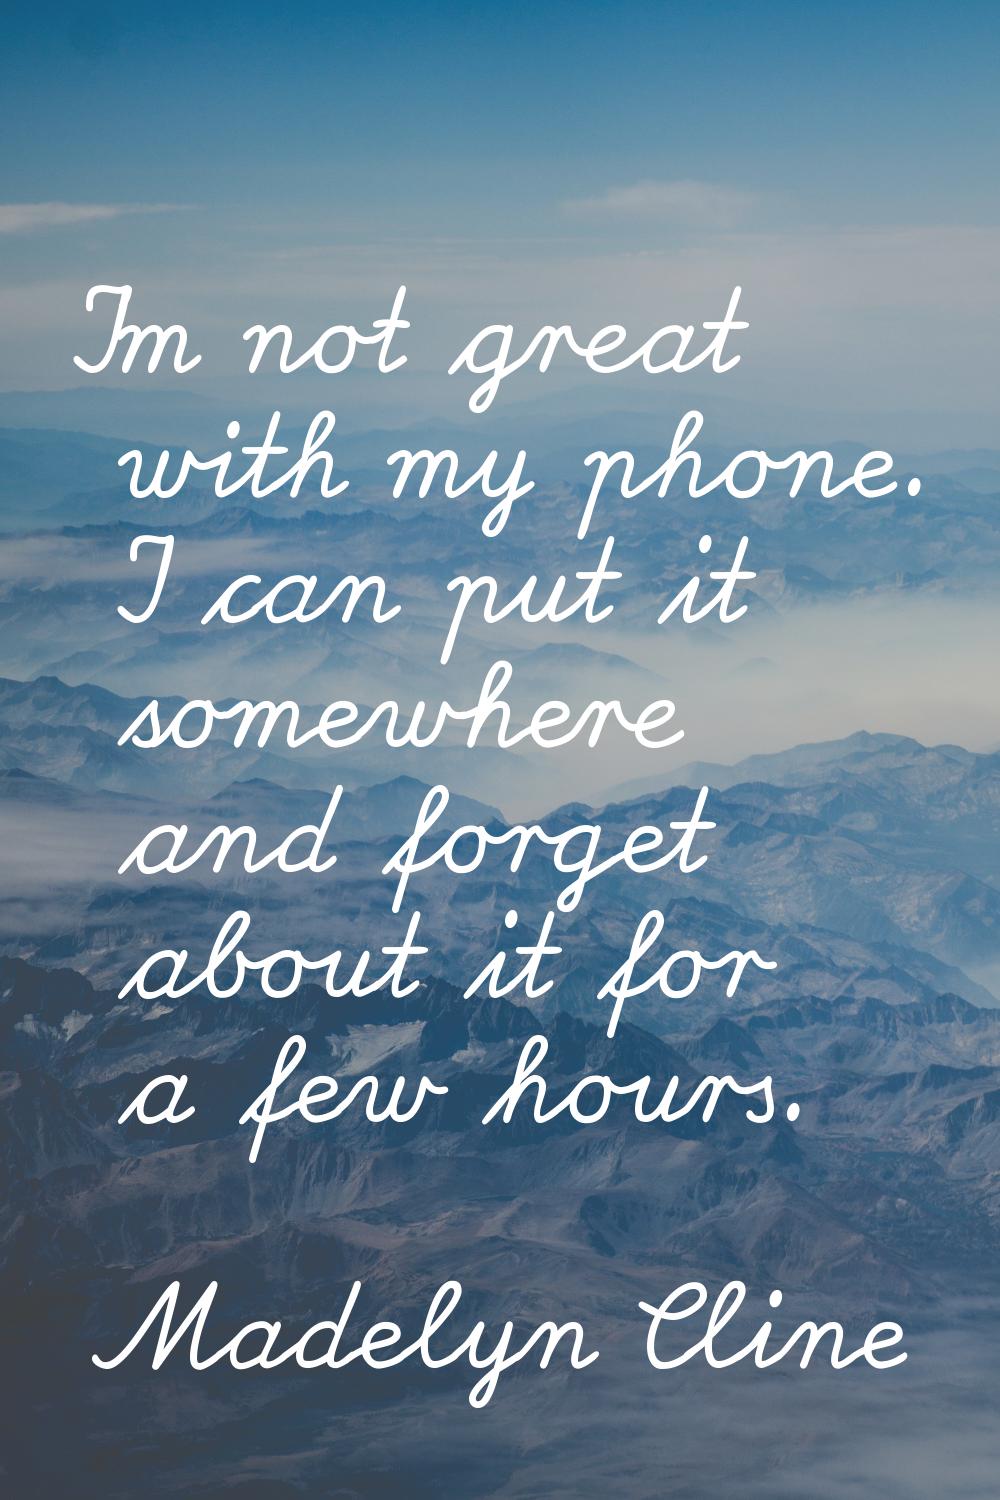 I'm not great with my phone. I can put it somewhere and forget about it for a few hours.